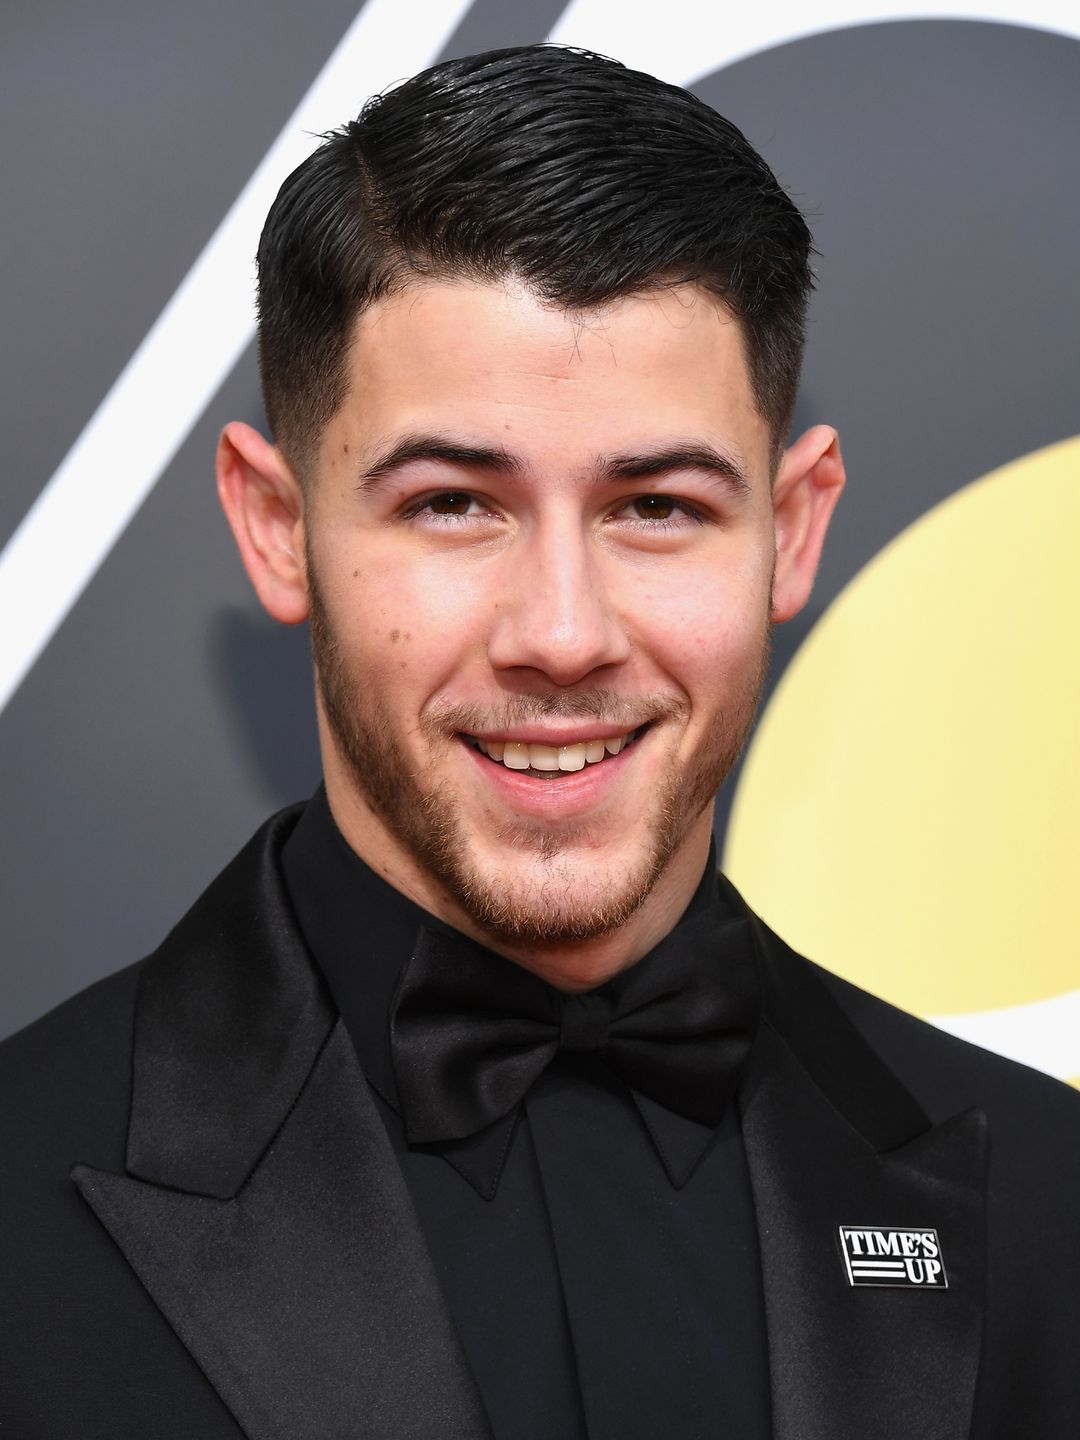 Nick Jonas does he have a wife